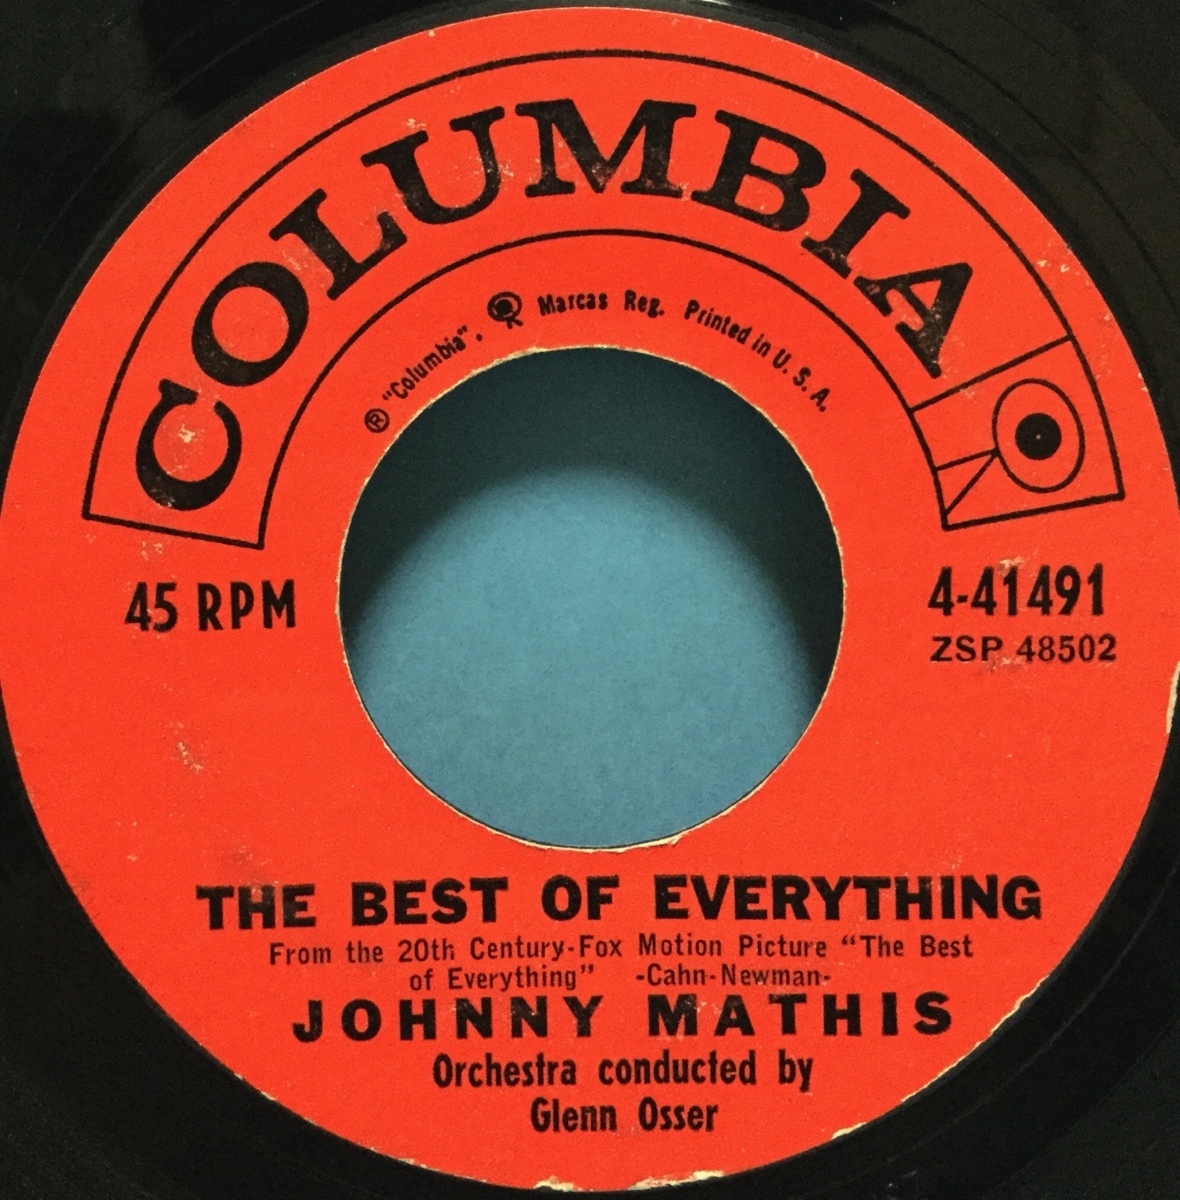 EP 洋楽 Johnny Mathis / The Best Of Everything 米盤_画像2